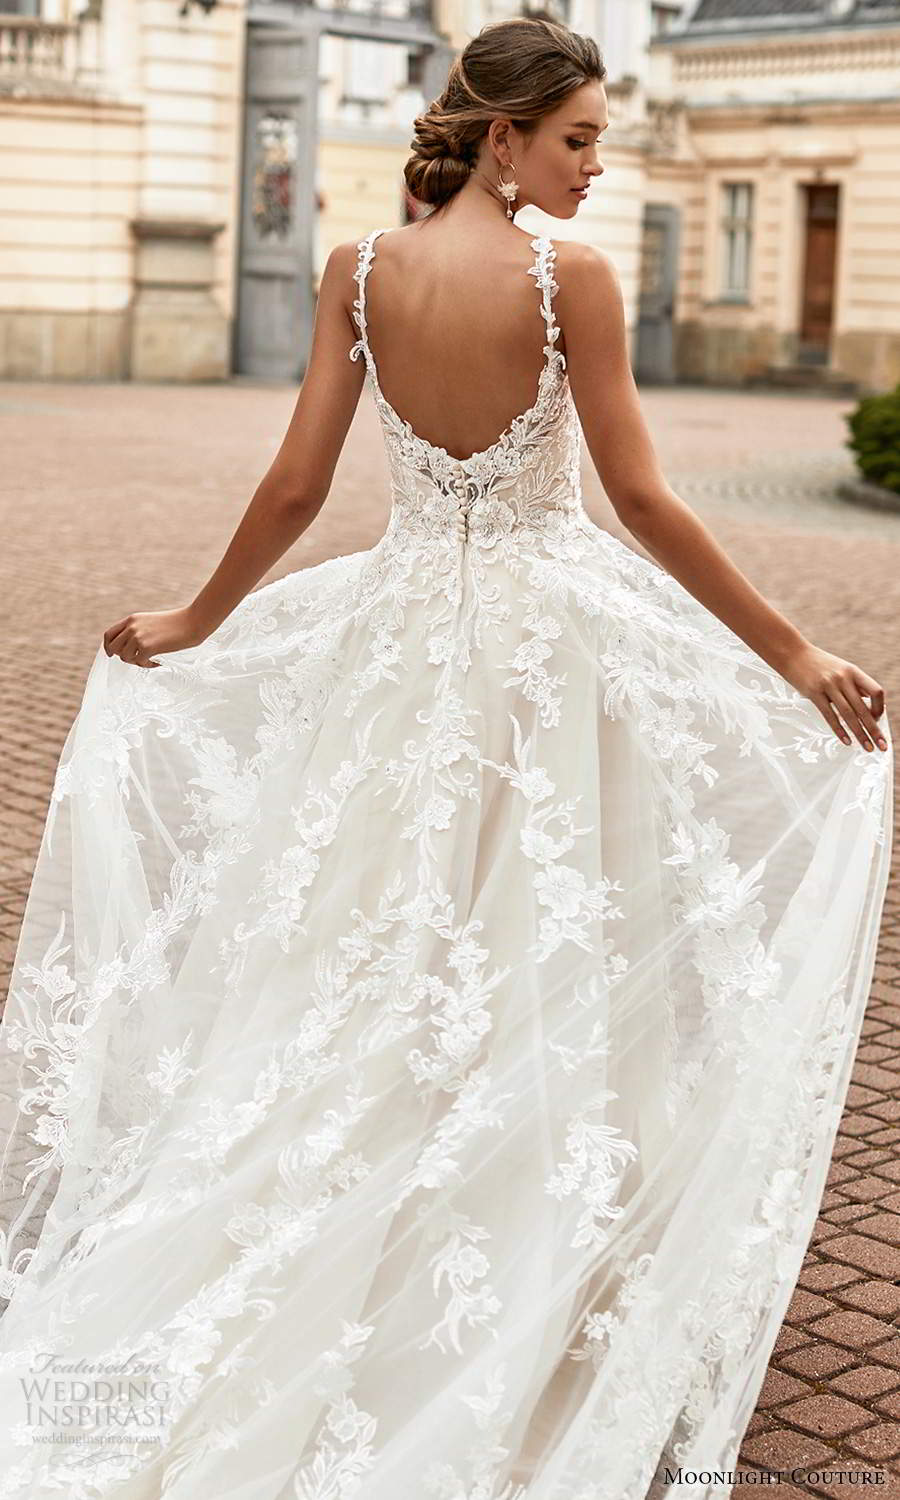 moonlight couture spring 2021 bridal sleeveless straps sweetheart neckline fully embellished a line ball gown wedding dress chapel train (4) zbv